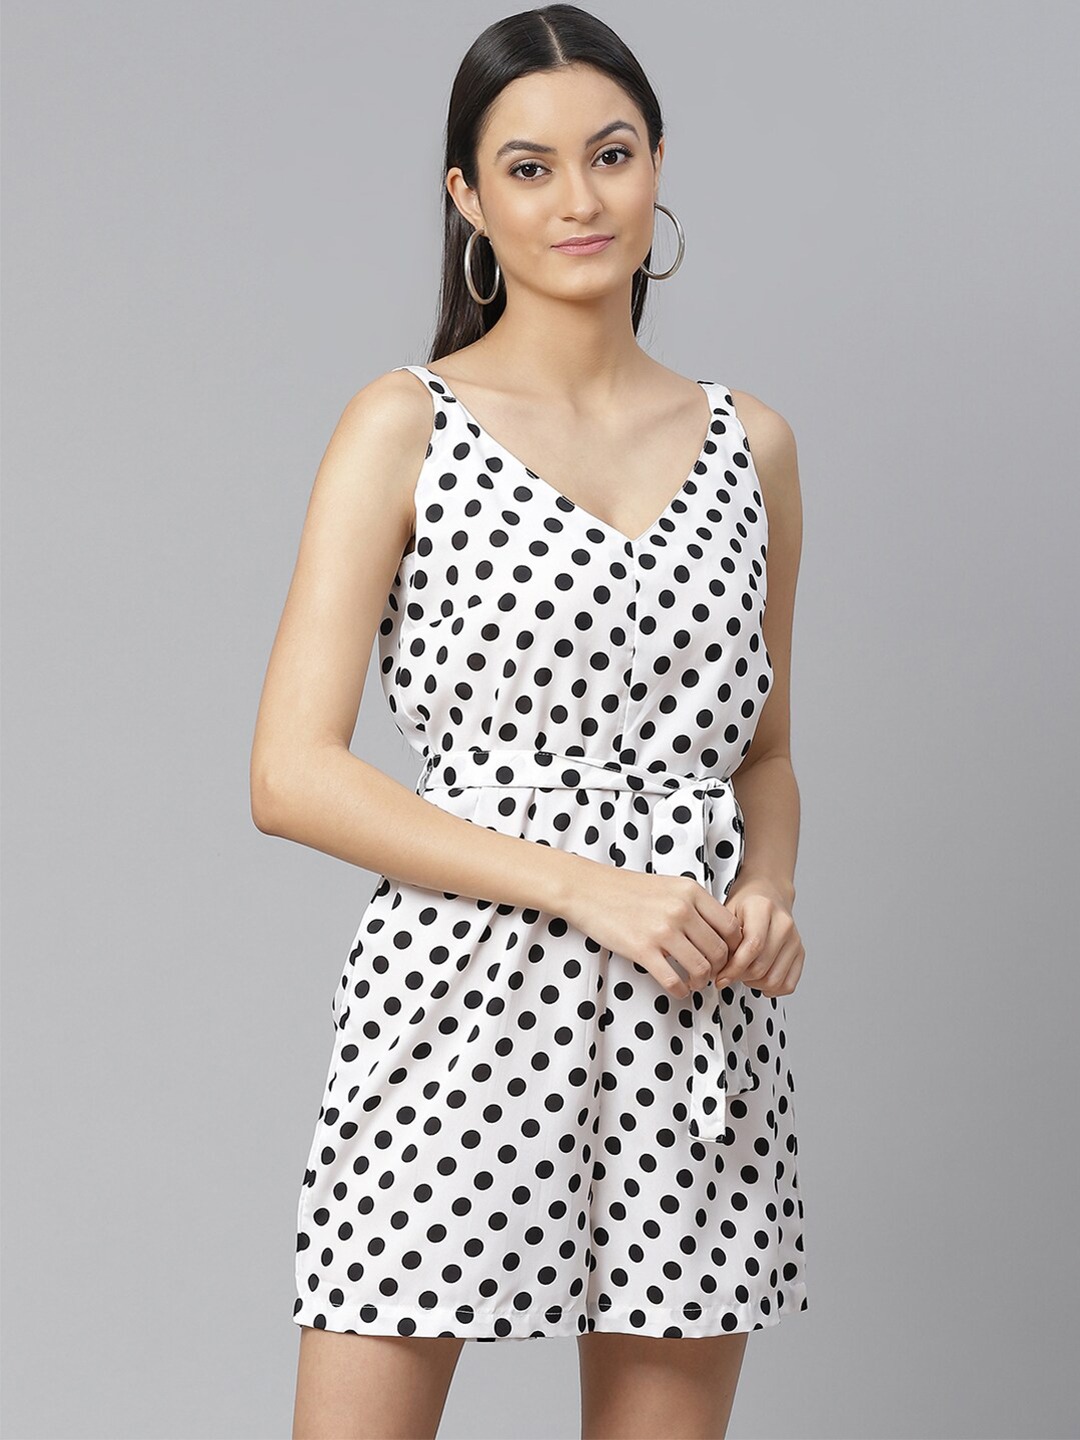 Clothing Jumpsuit | SIRIKIT Women White & Black Polyester Polka Dots Printed Playsuit With Waist Tie-Ups - RA38138